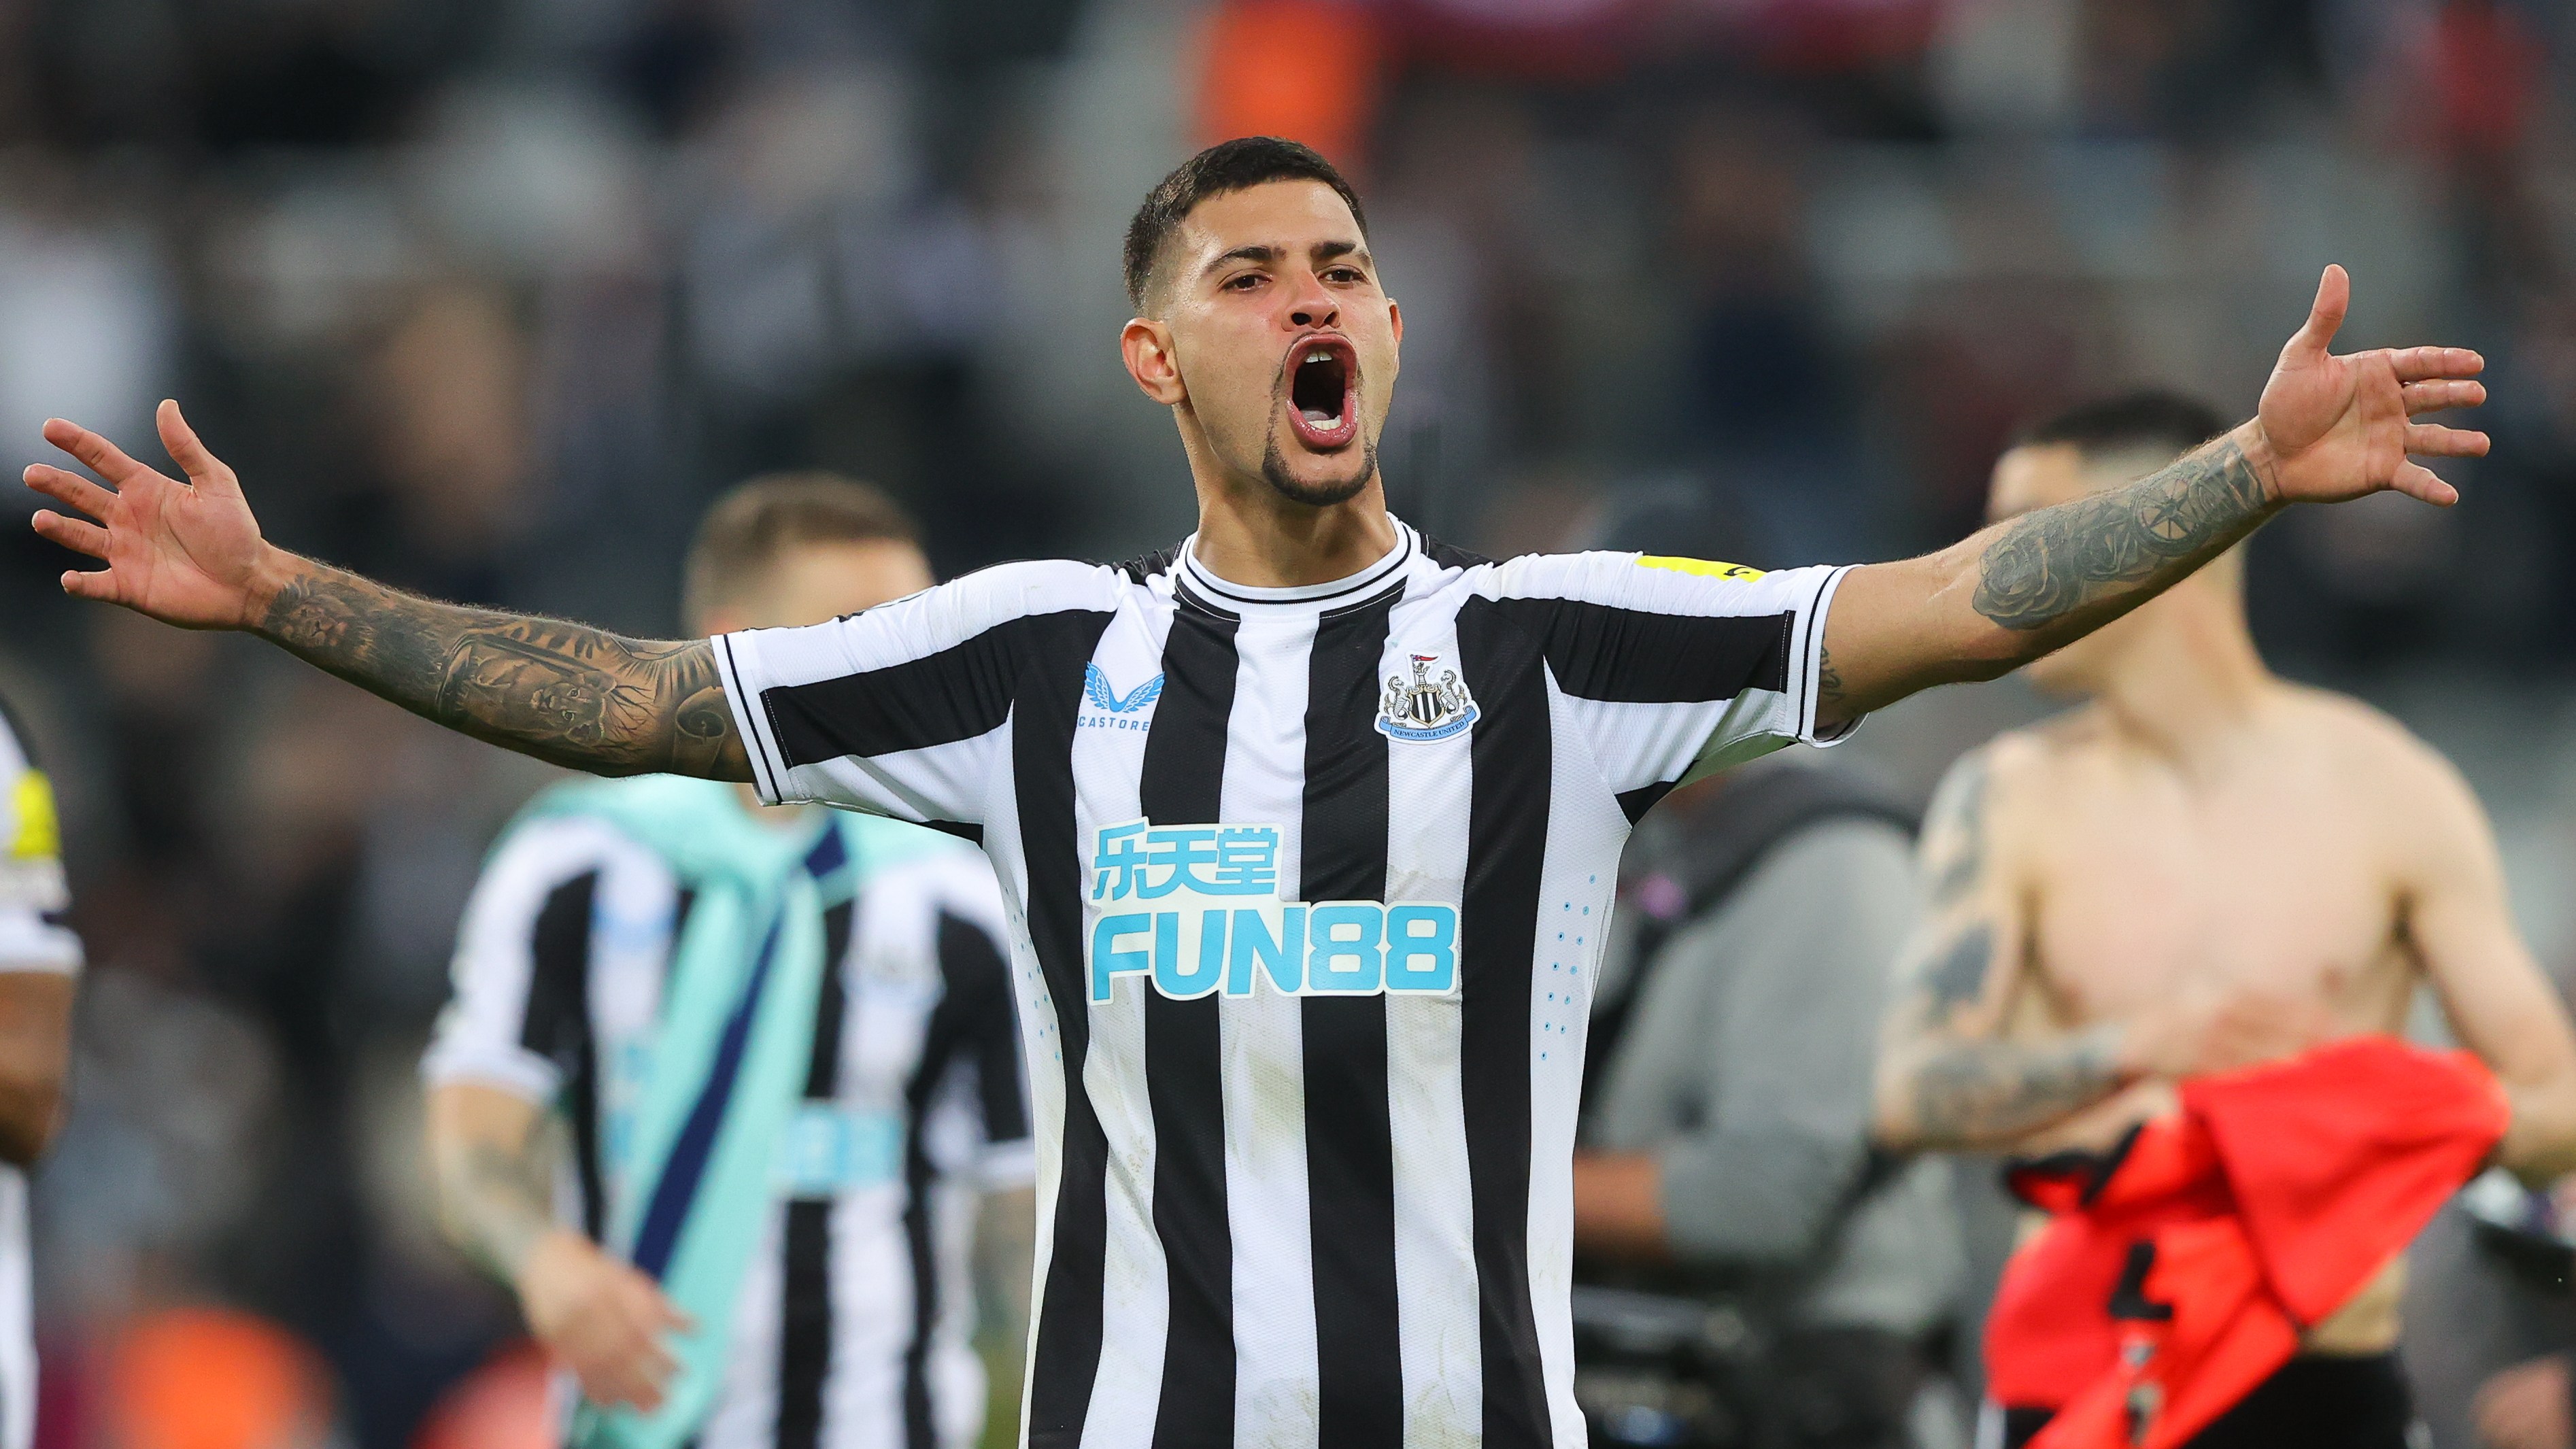 Newcastle close on shirt deal with company owned by club’s Saudi backers